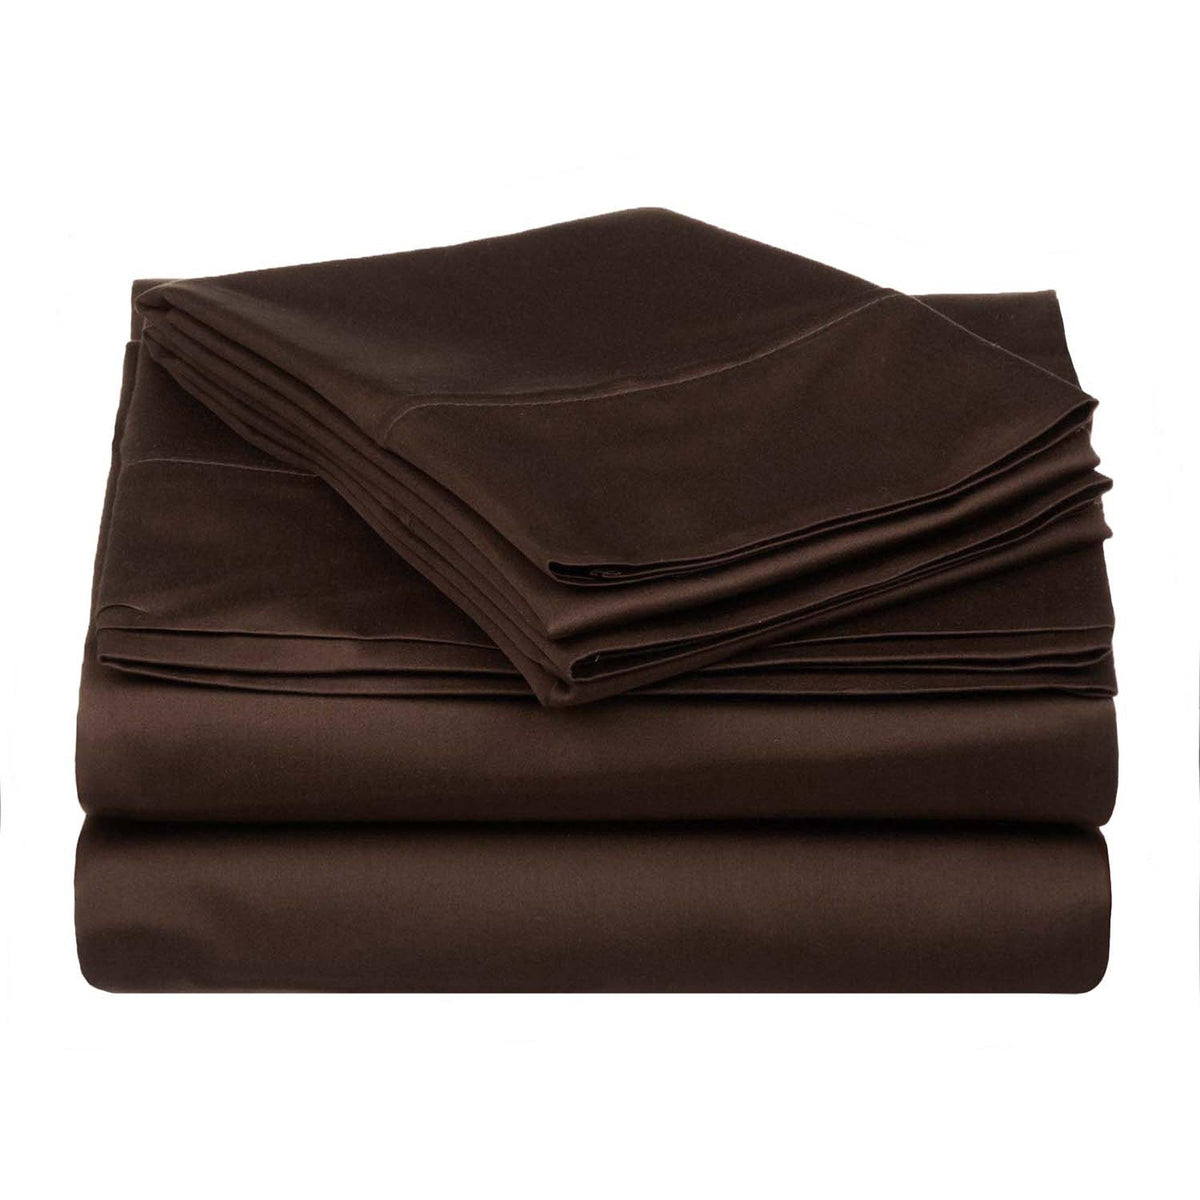  Superior Egyptian Cotton 530 Thread Count Solid Sheet Set - Charcoal